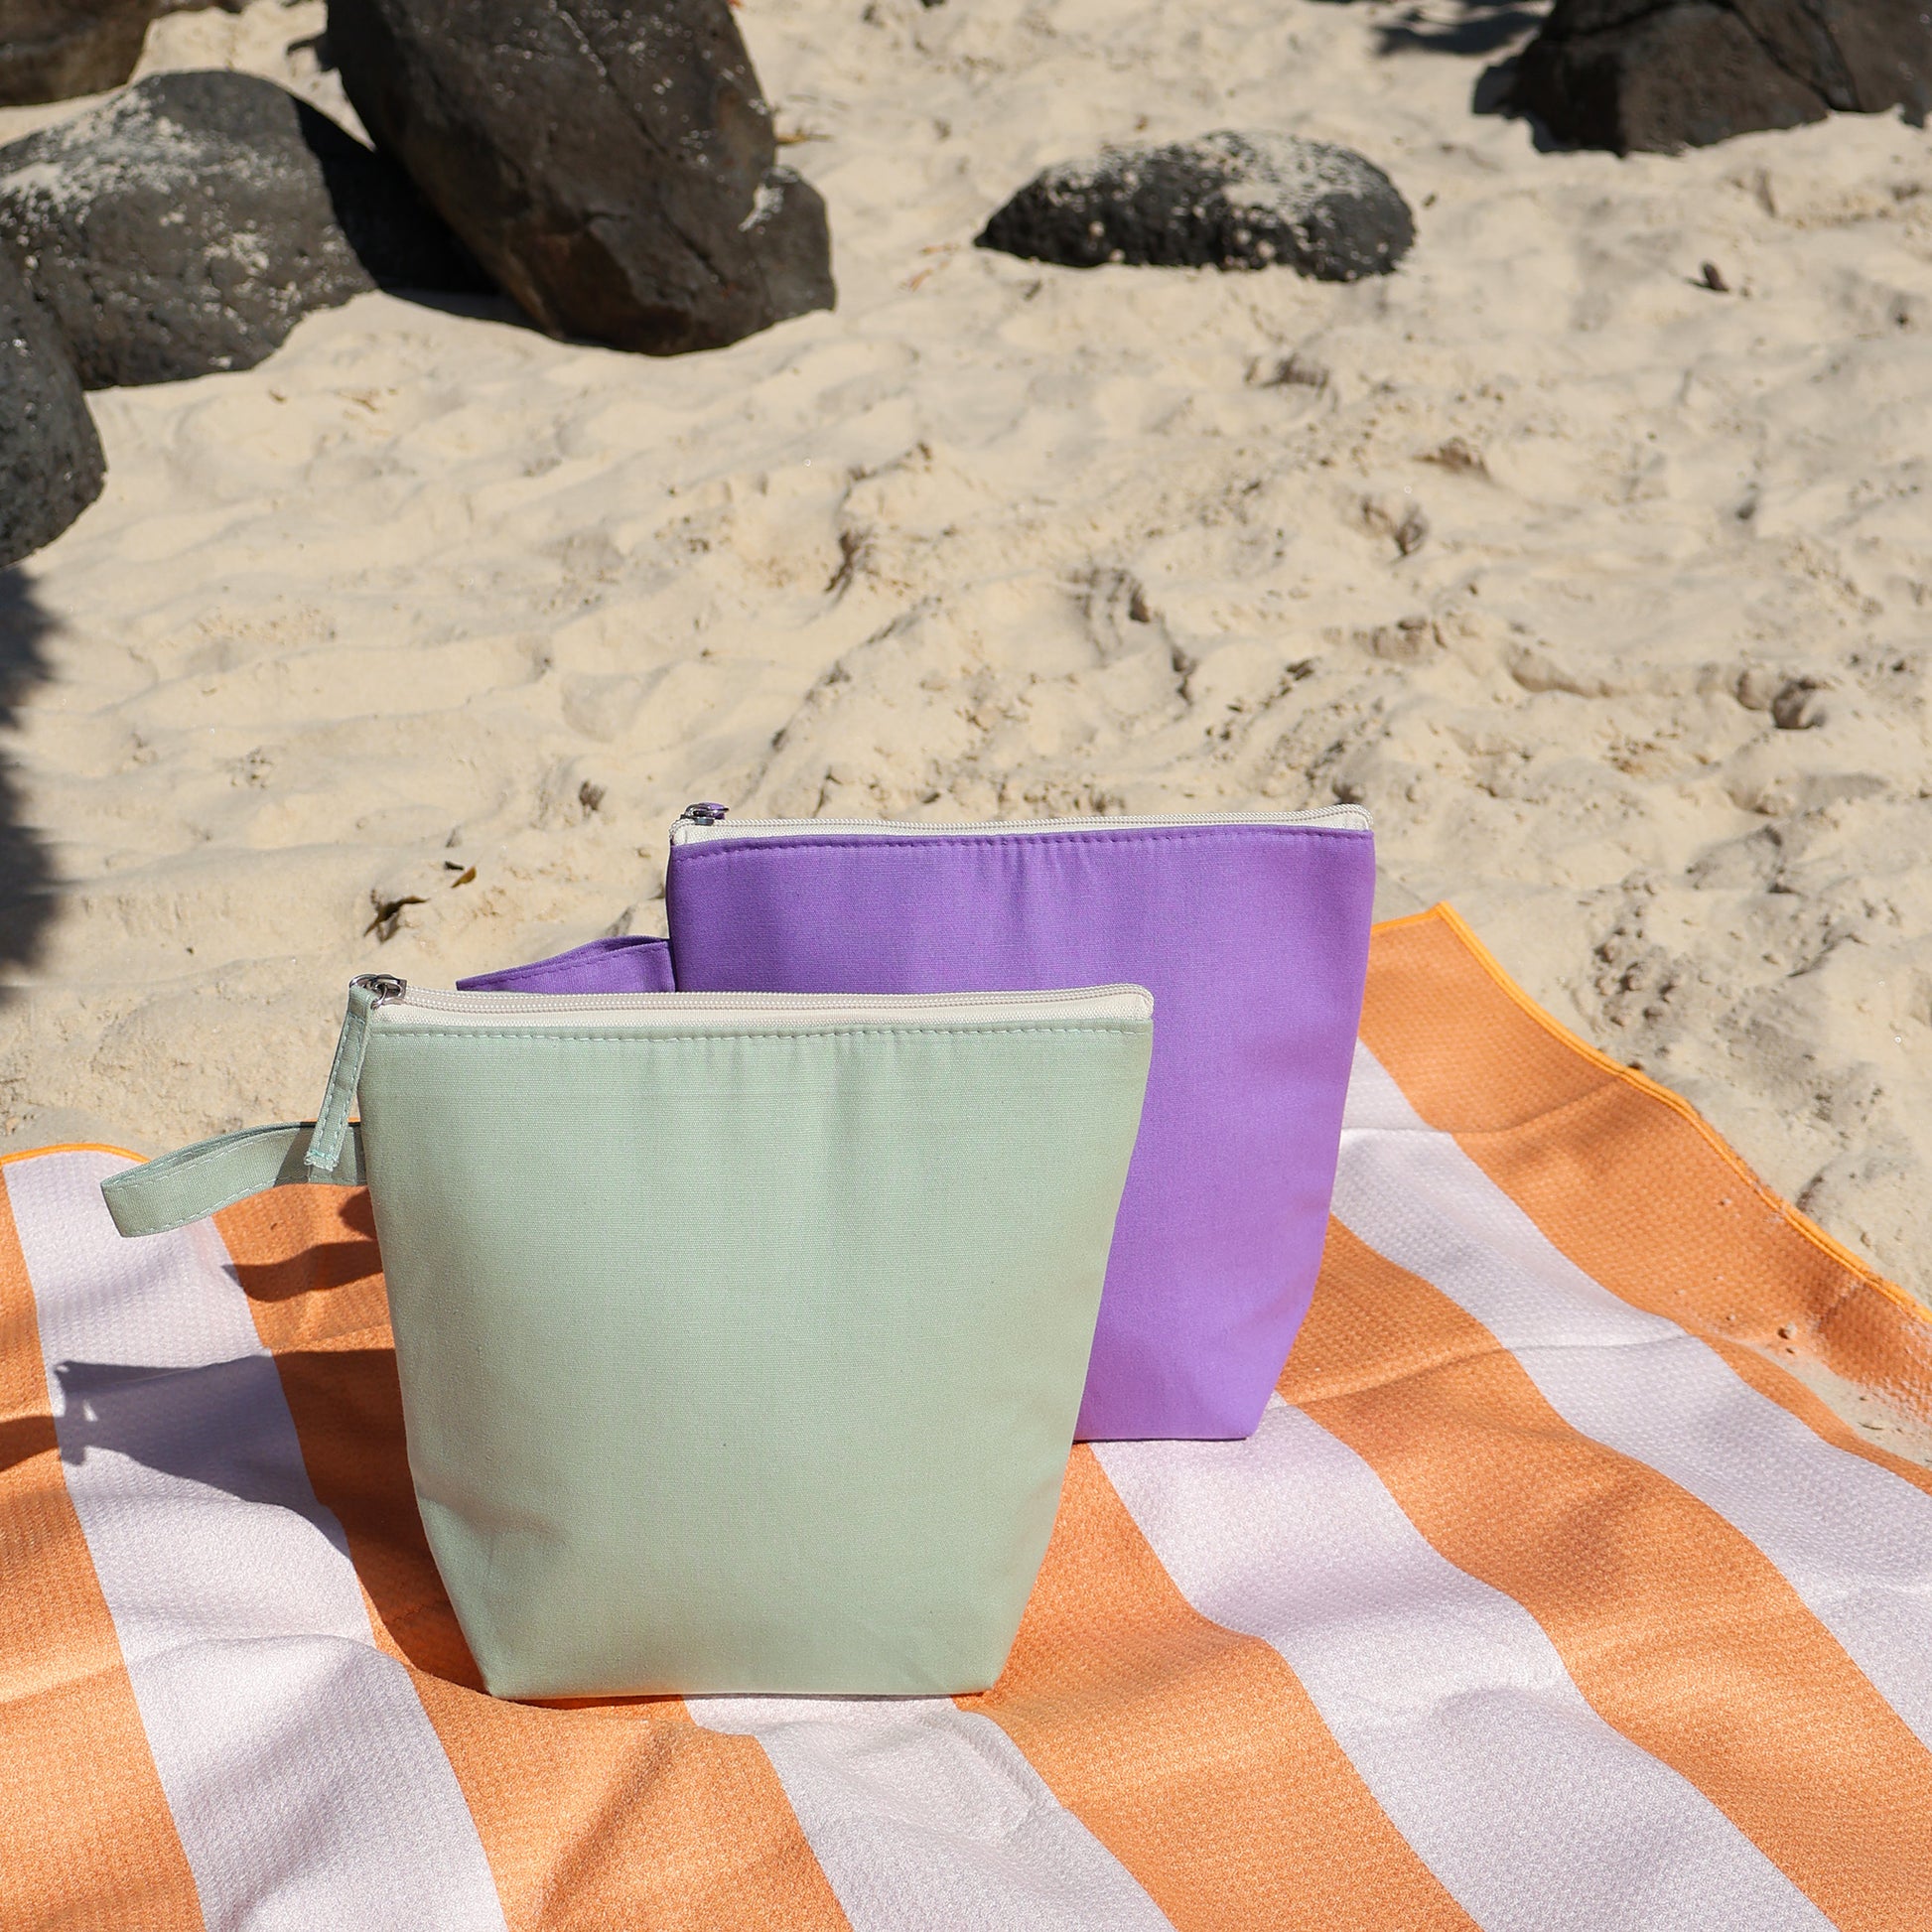 Cooler pods at the beach in action seen here on our Amalfi Sand Free beach towel in orange stripe.  Cute little accessory for your beach or park trip with the kids!